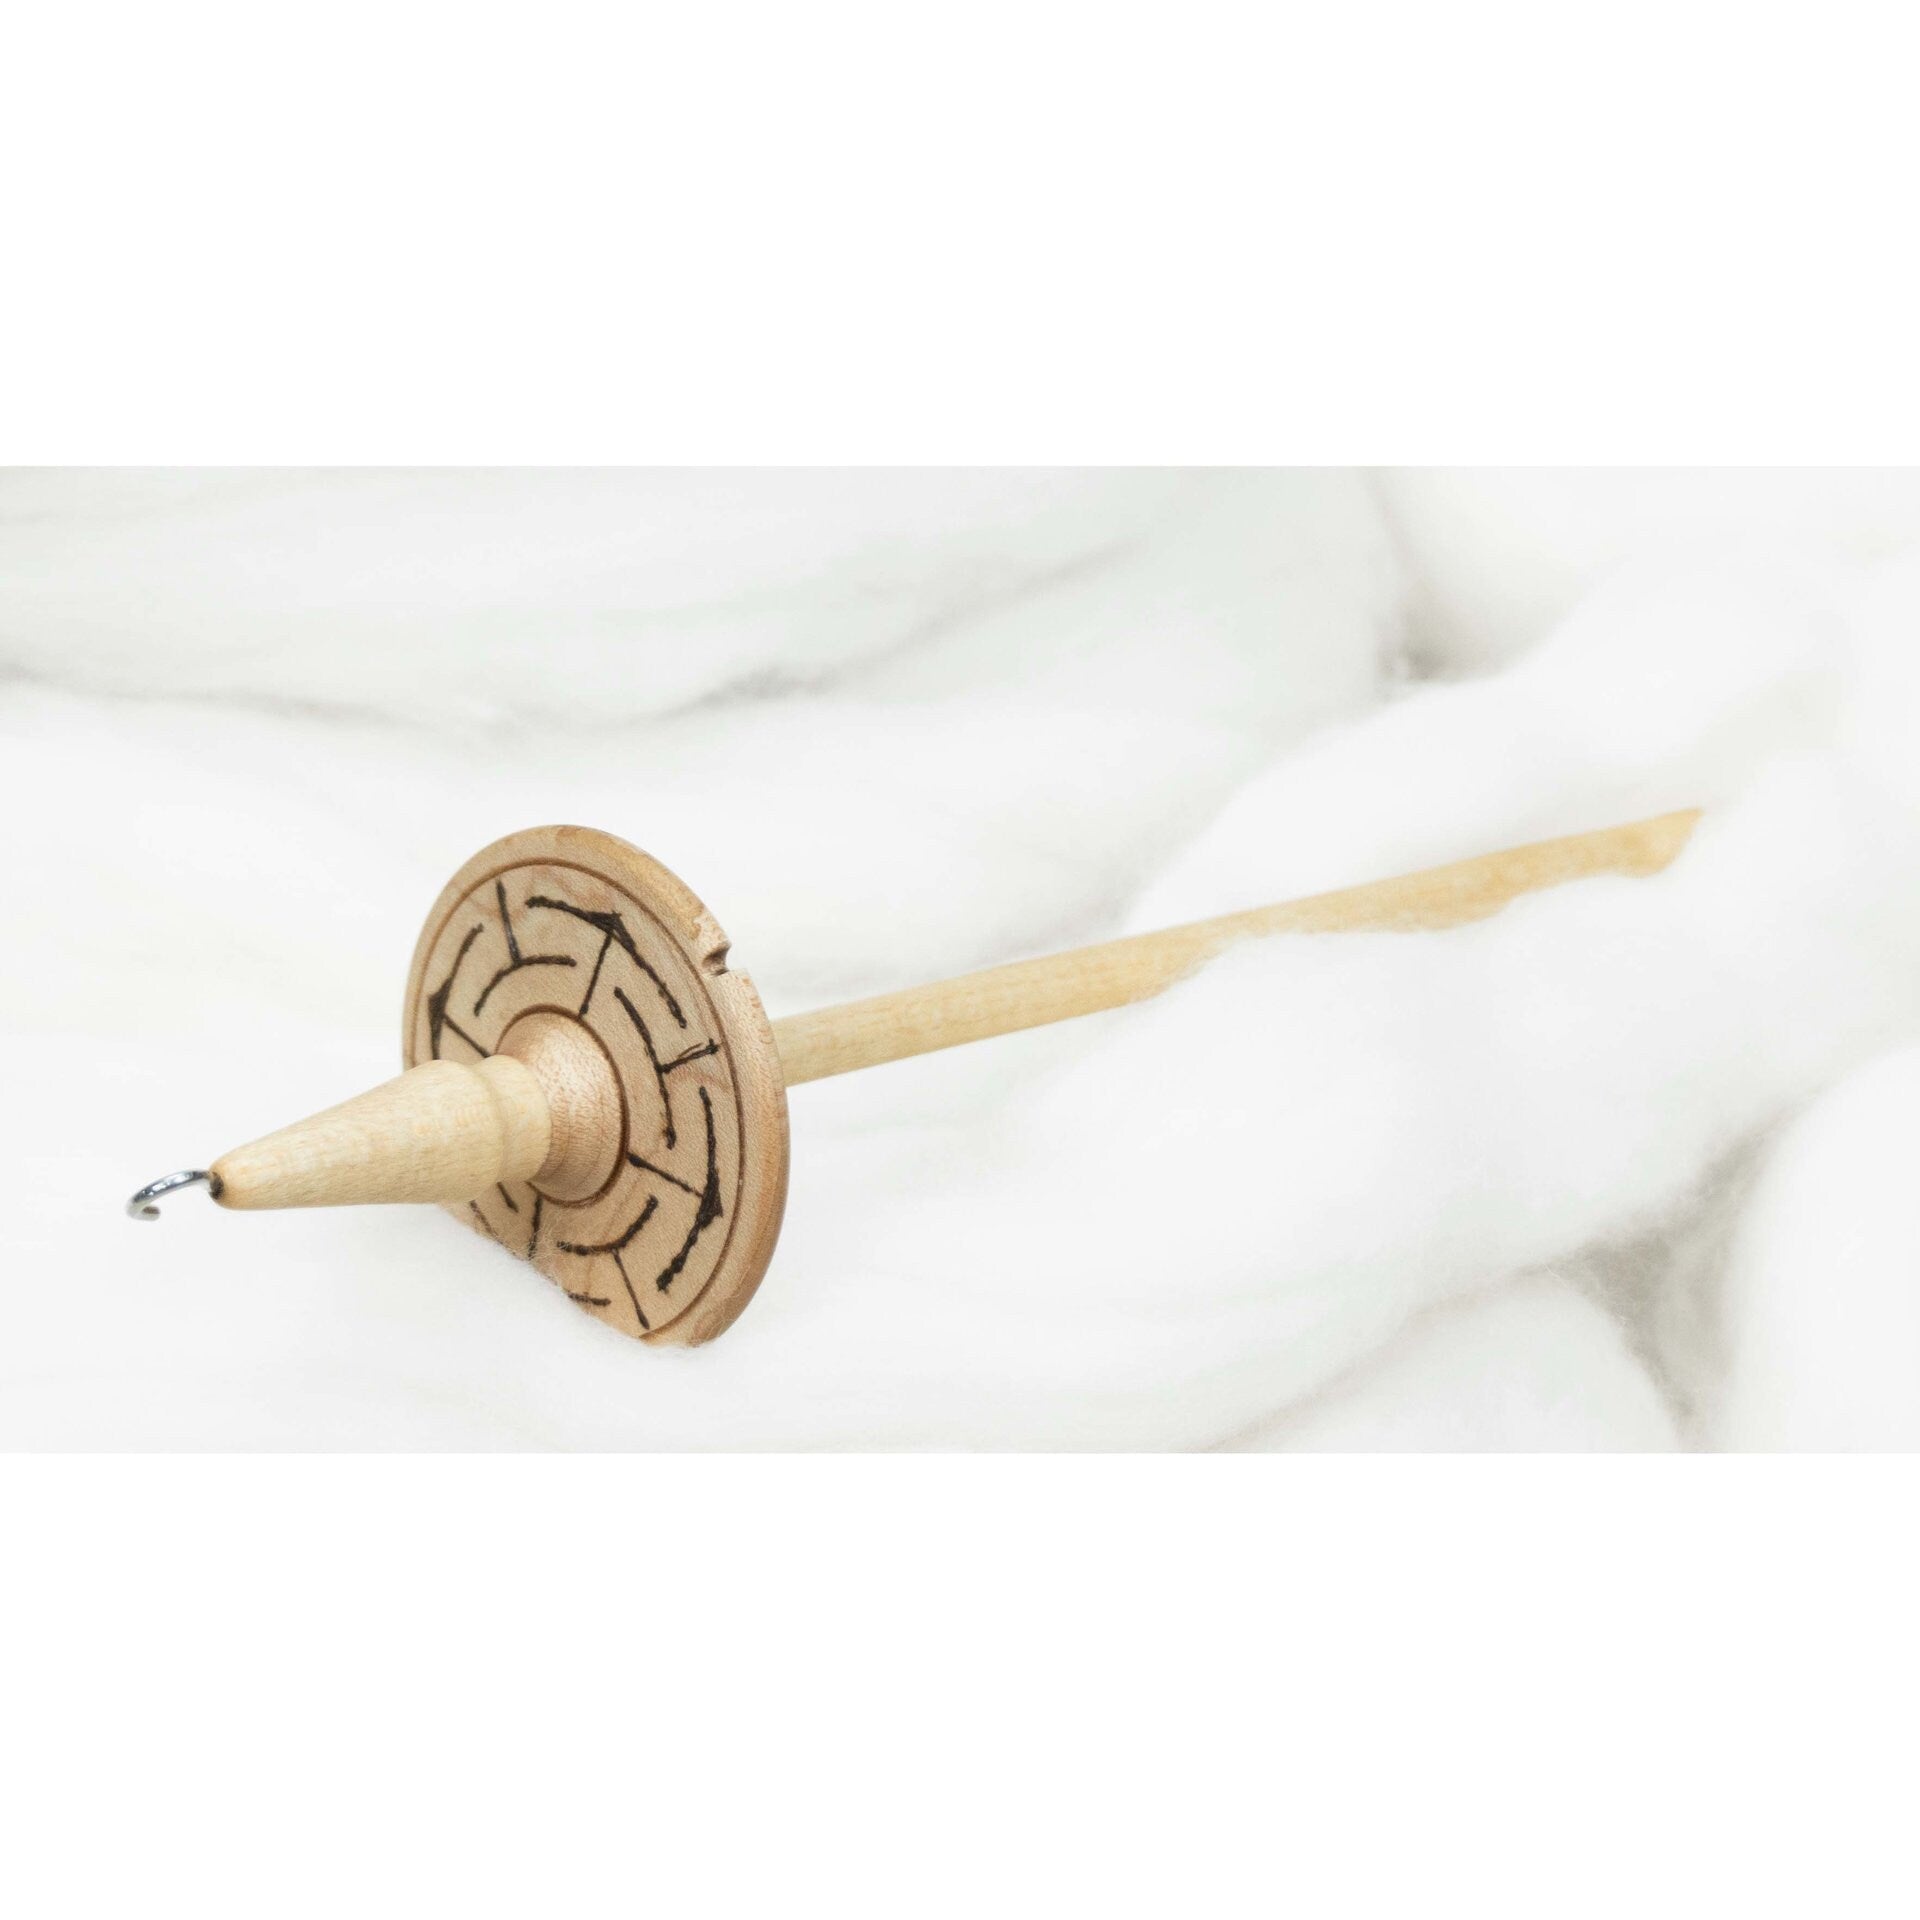 Labyrinth - Llina Hand-Turned Maple Wood Pyrograph Drop Spindle Lightweight Top Whorl 14 Grams